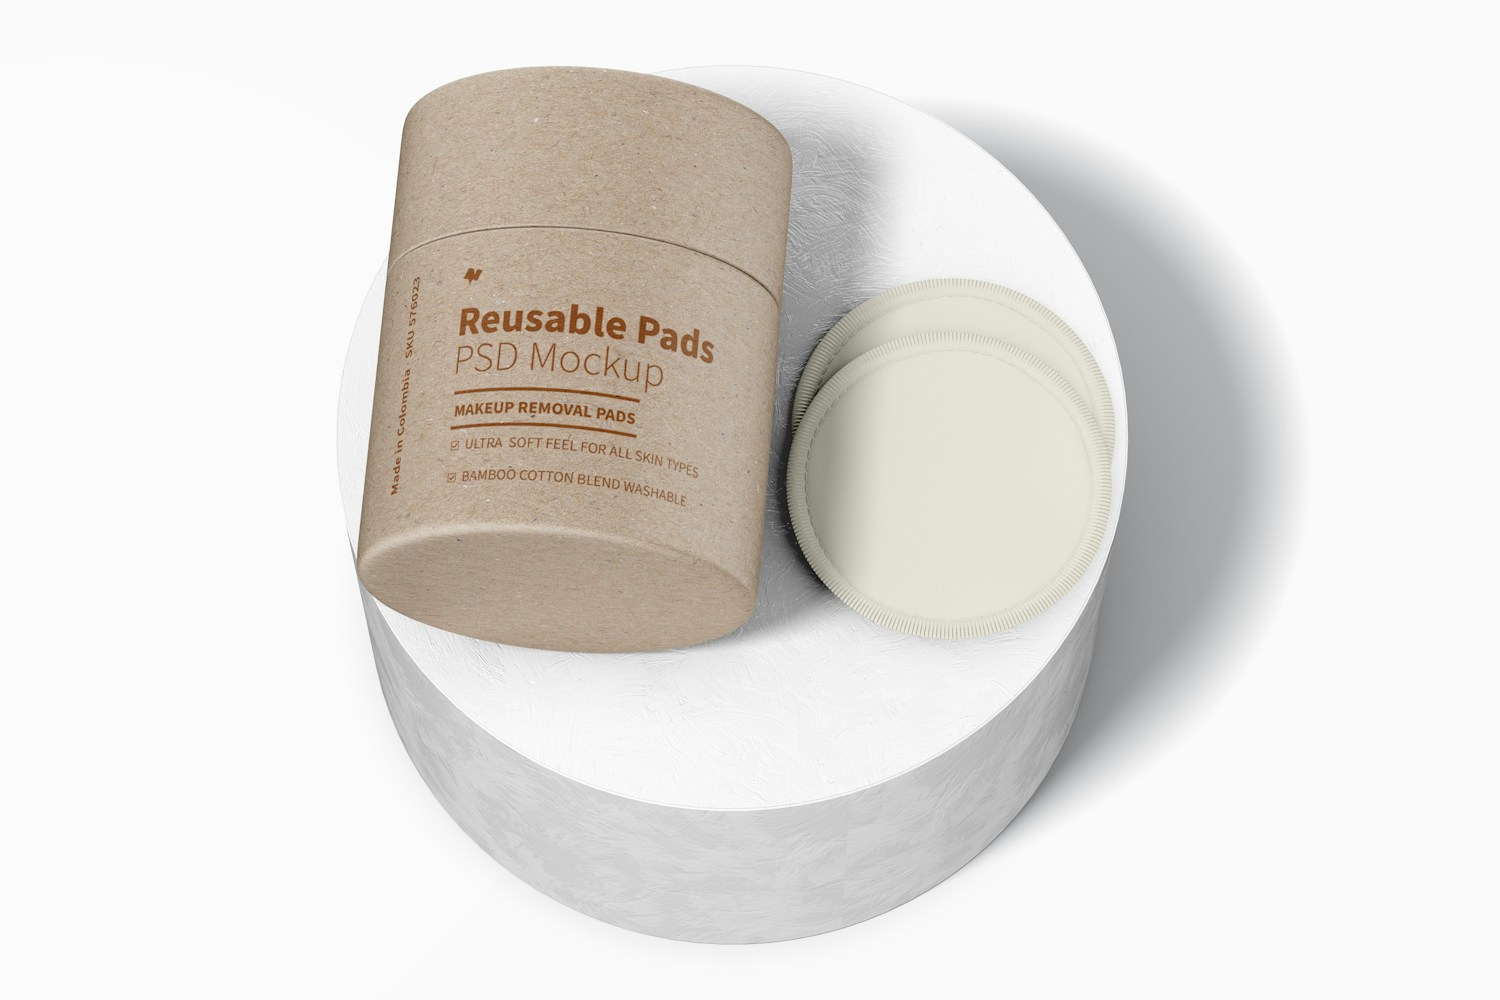 Reusable Pads Packaging Mockup, Perspective View